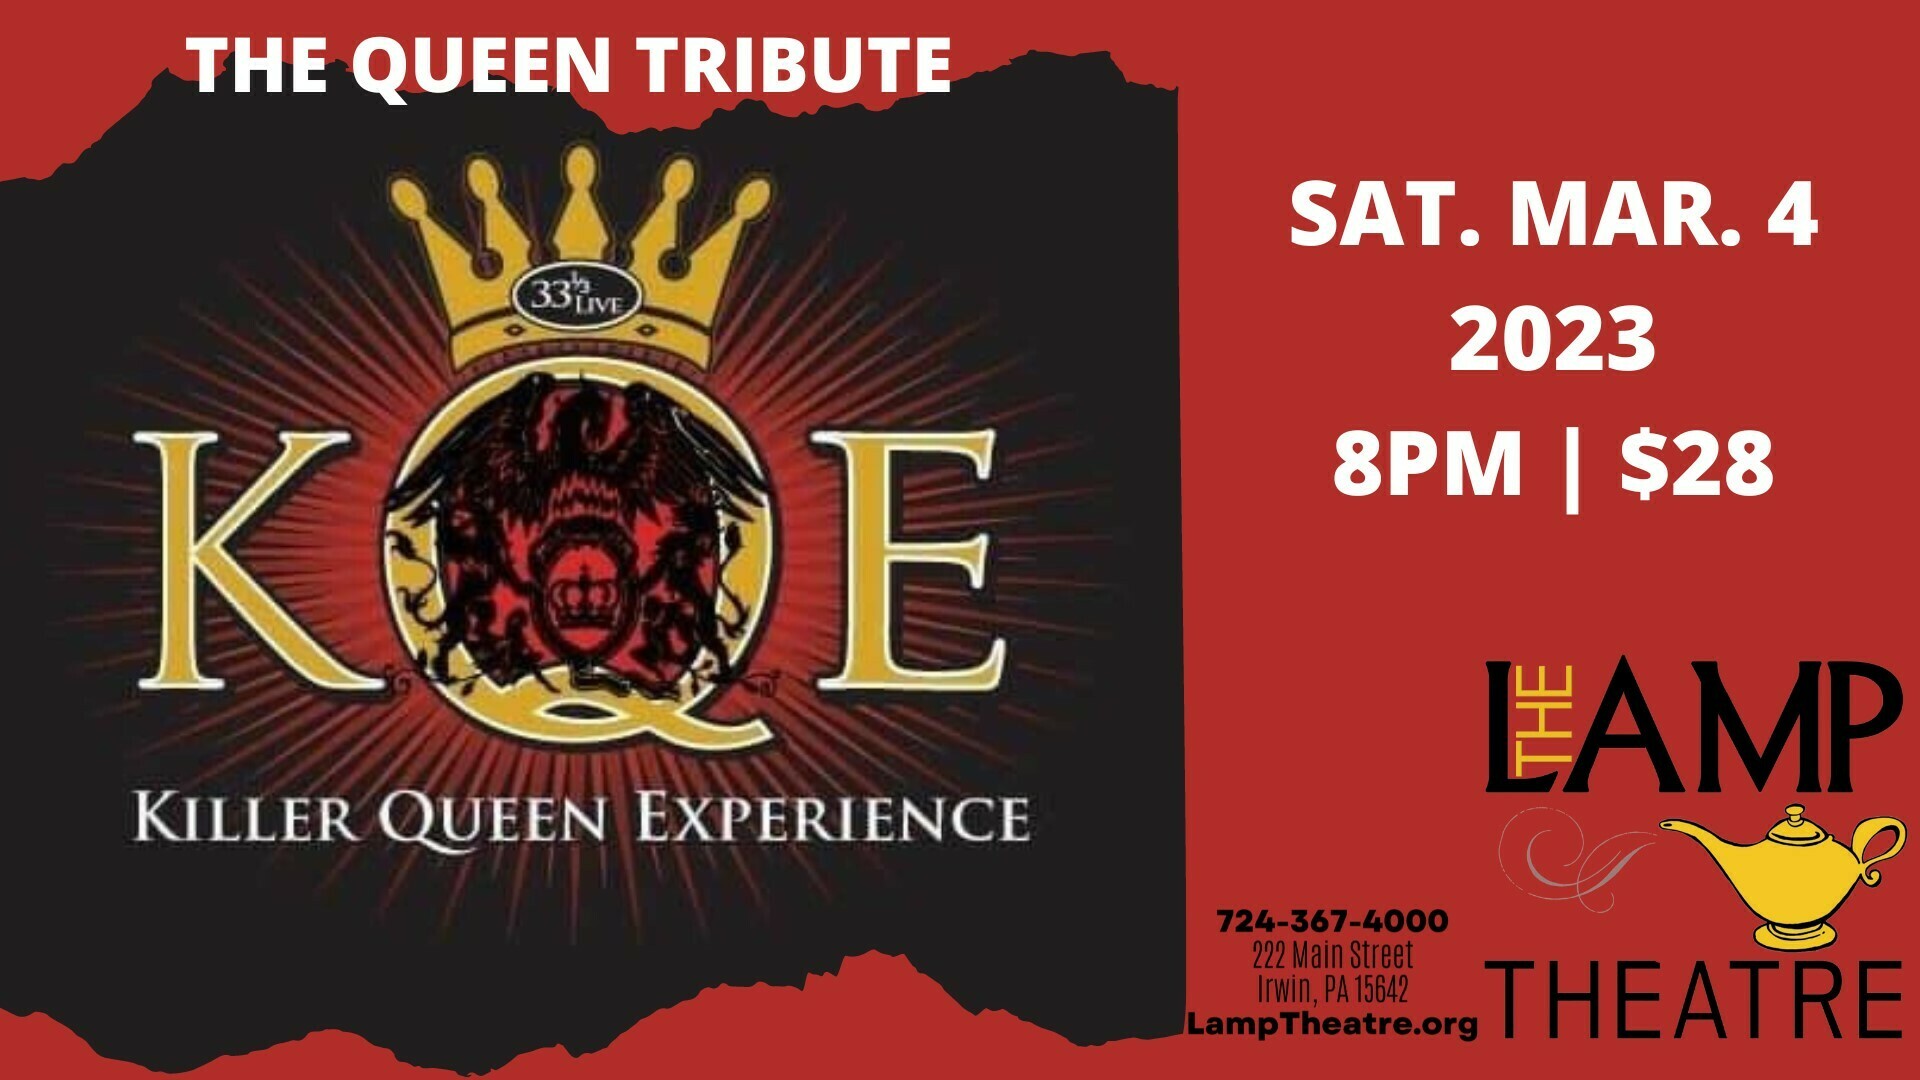 33 1/3 LIVE’s Killer Queen Experience, Irwin, Pennsylvania, United States